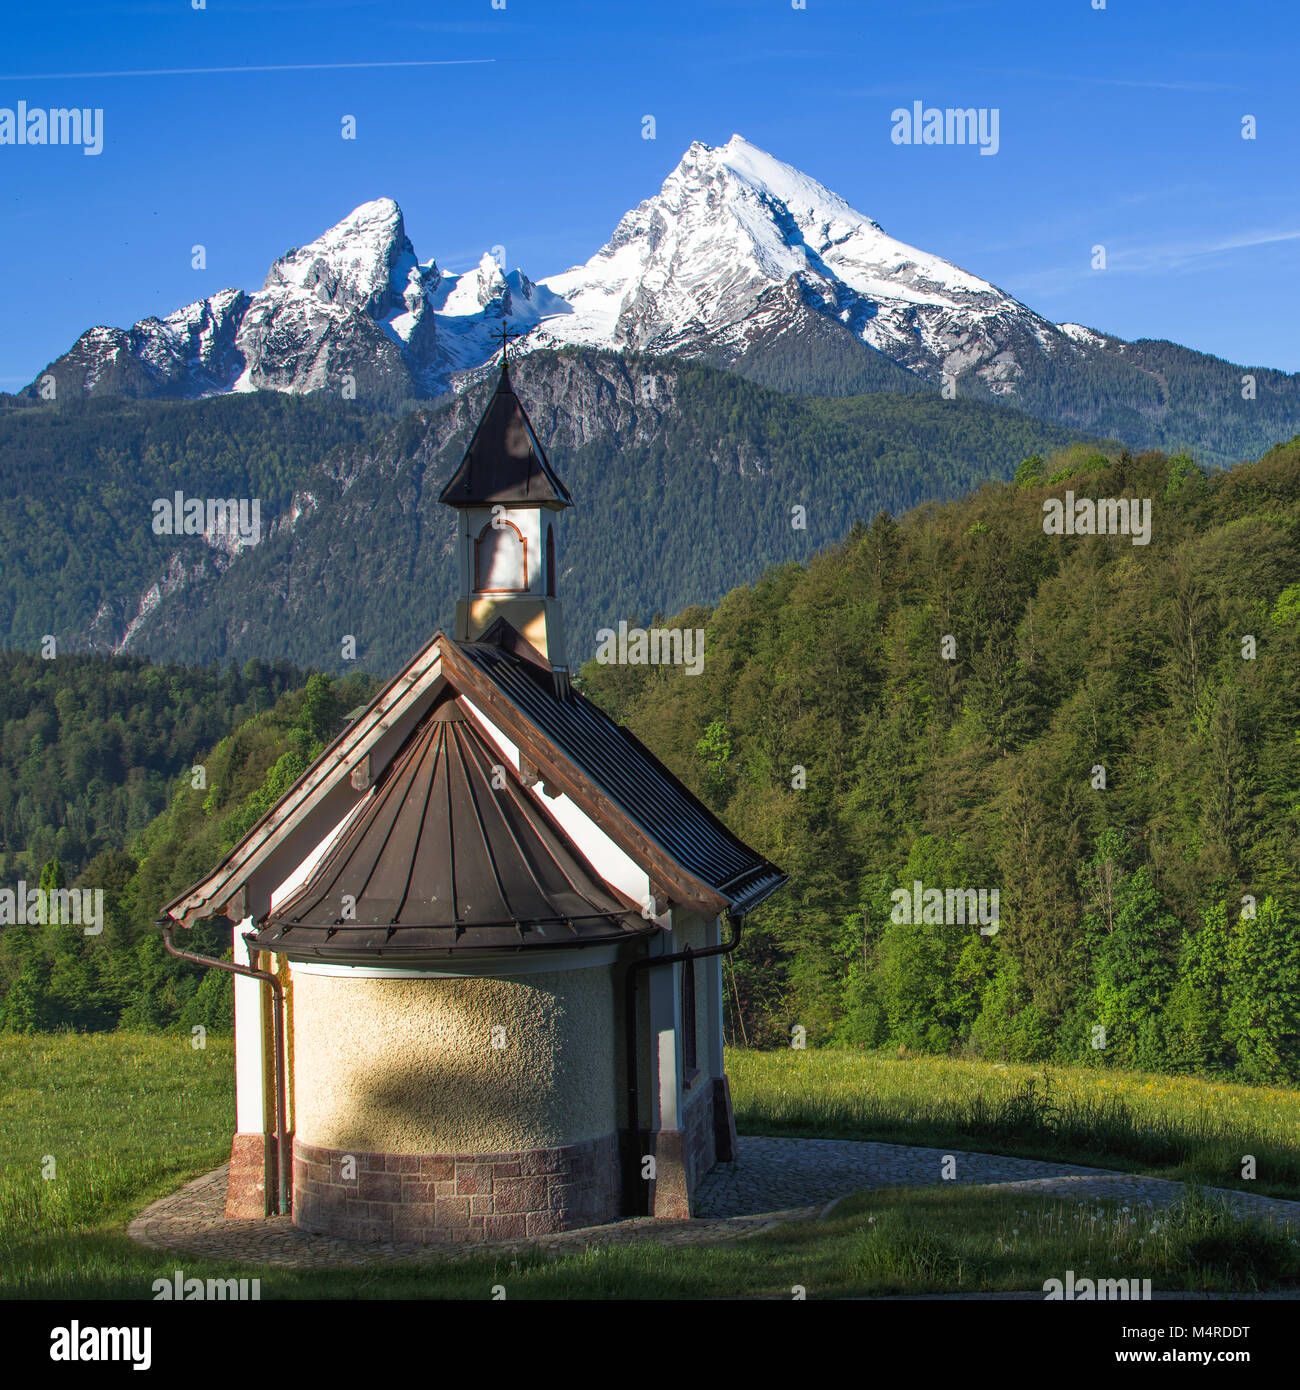 Small chapel Kirchleitn and snow-capped summits of Watzmann mountain. Square stock photo captured in German national park Berchtesgaden. Stock Photo